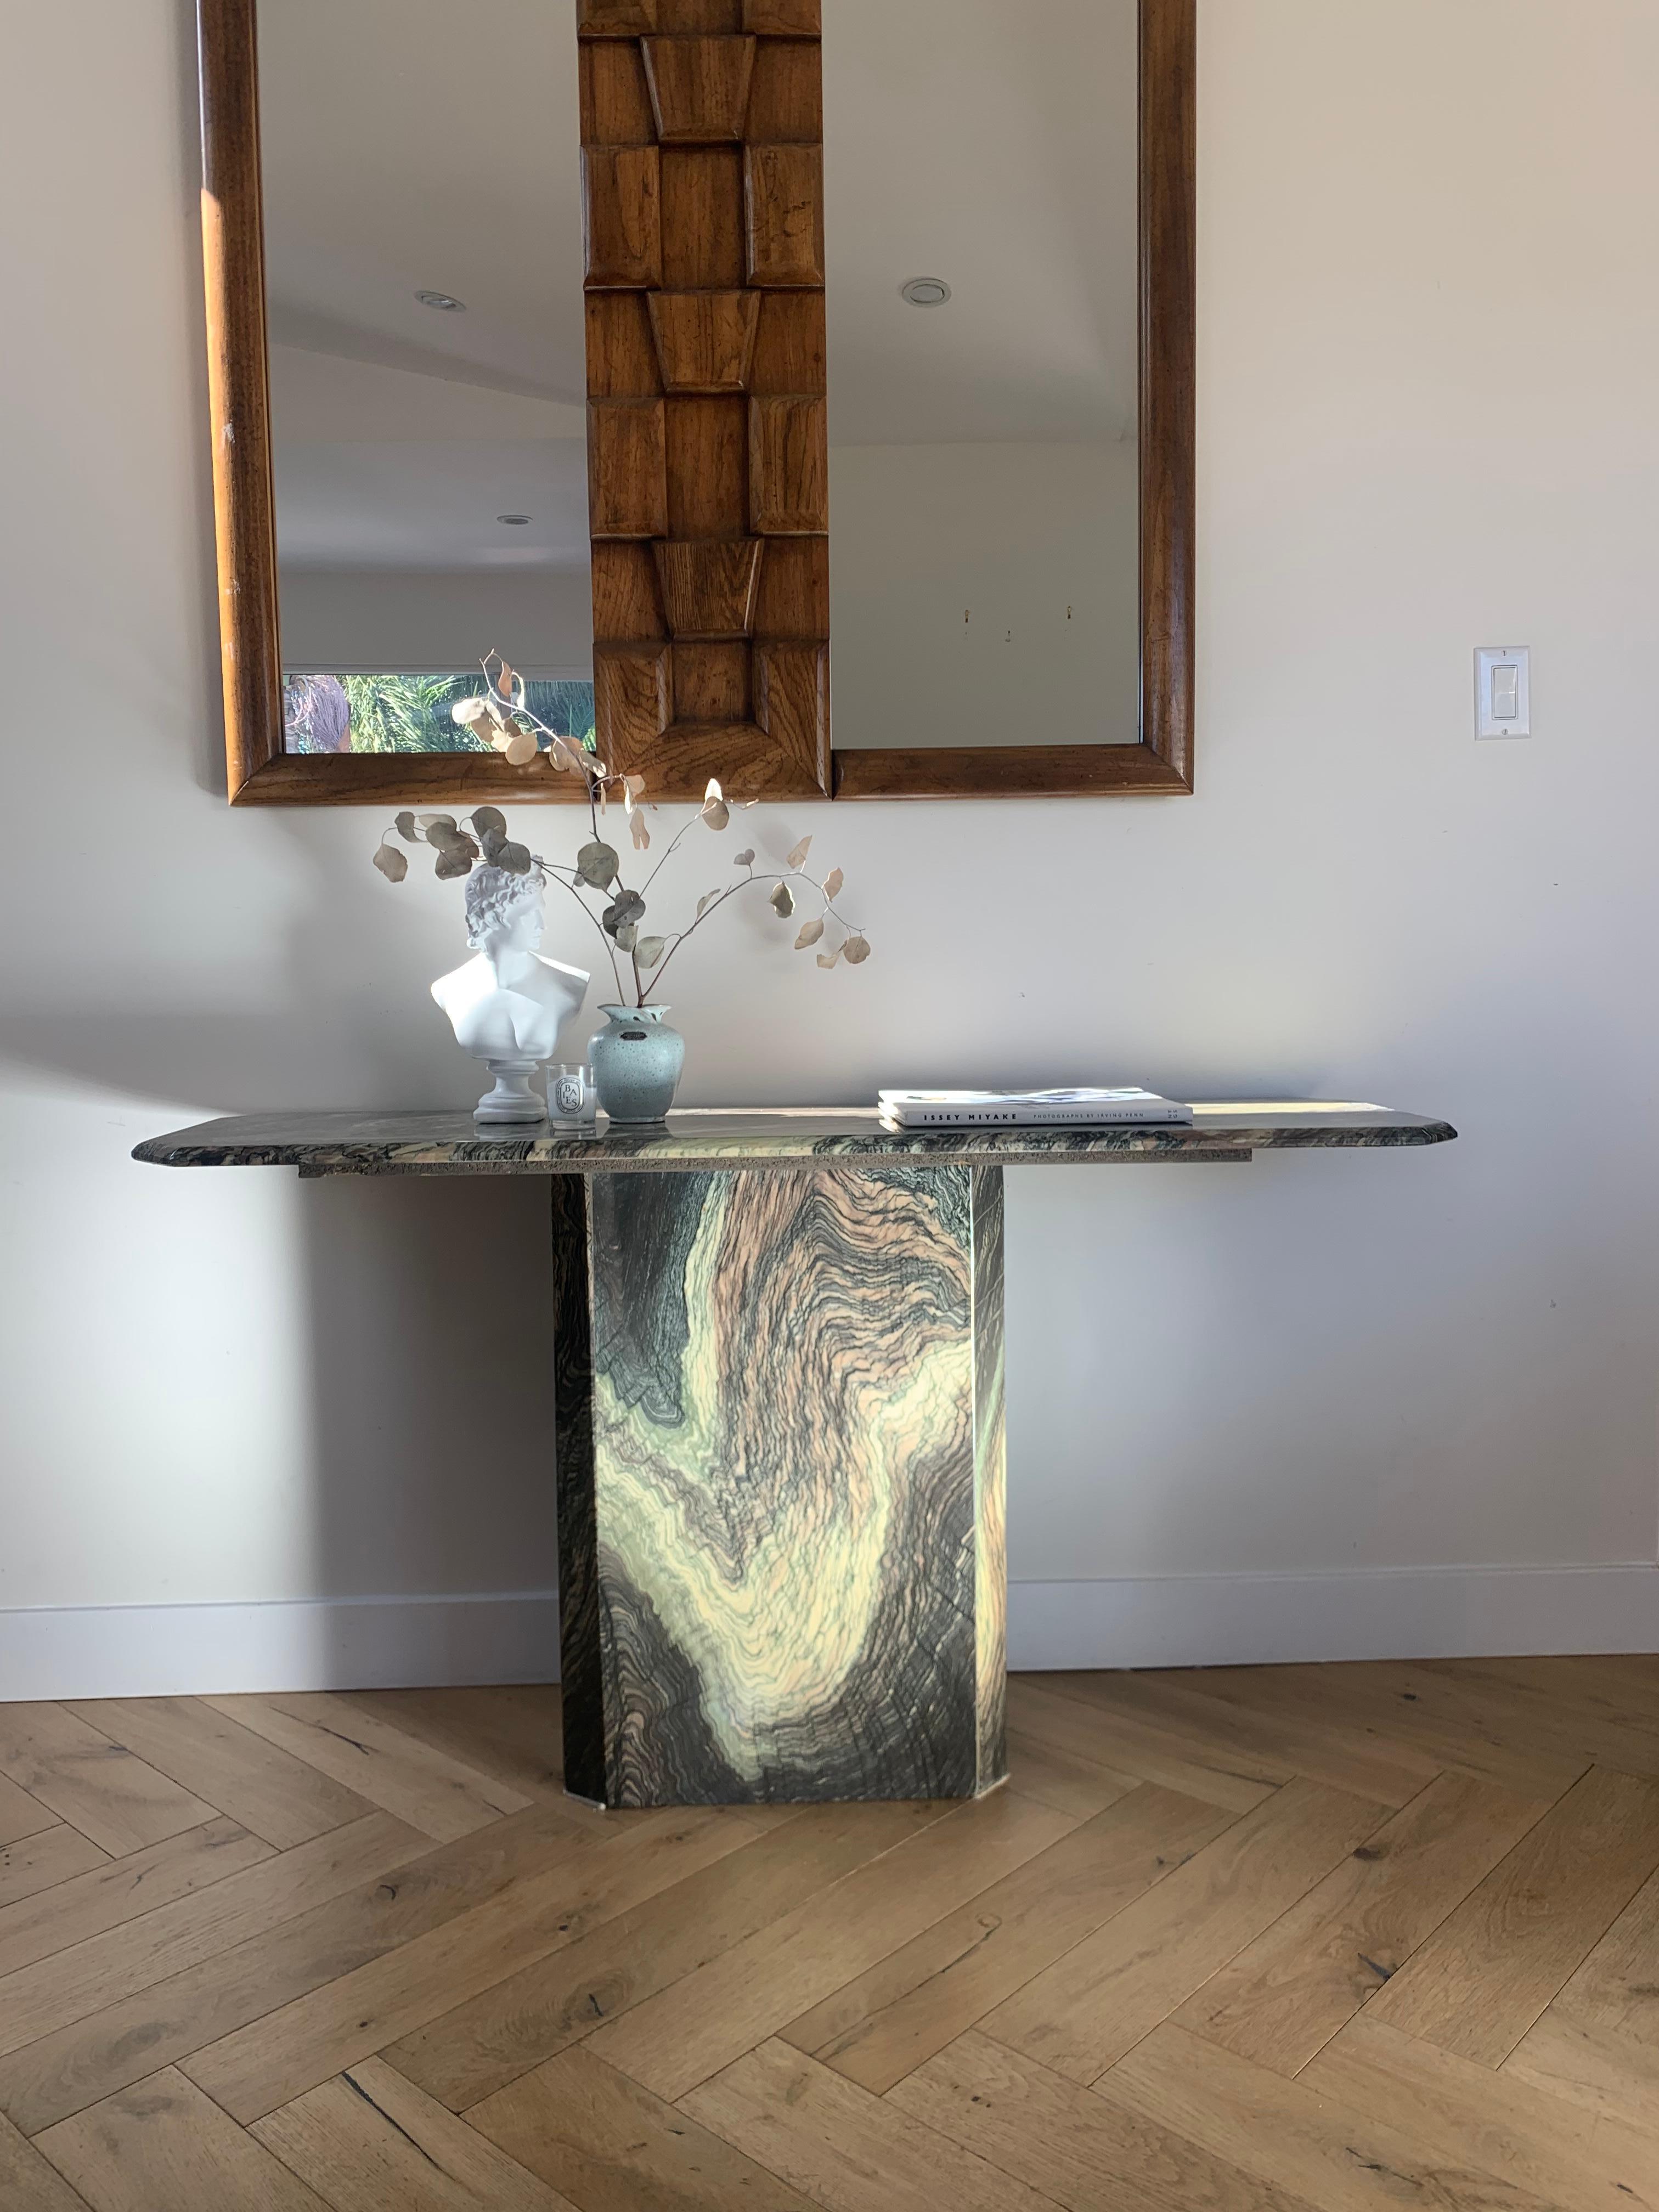 Vintage Italian luana marble console table, 1970s. Pale ochre, rust, and seafoam with robust pine veining. A makeshift wooden block sits between the pedestal base and top (see video) but can be removed if desired. Heavy but 2 pieces for easy